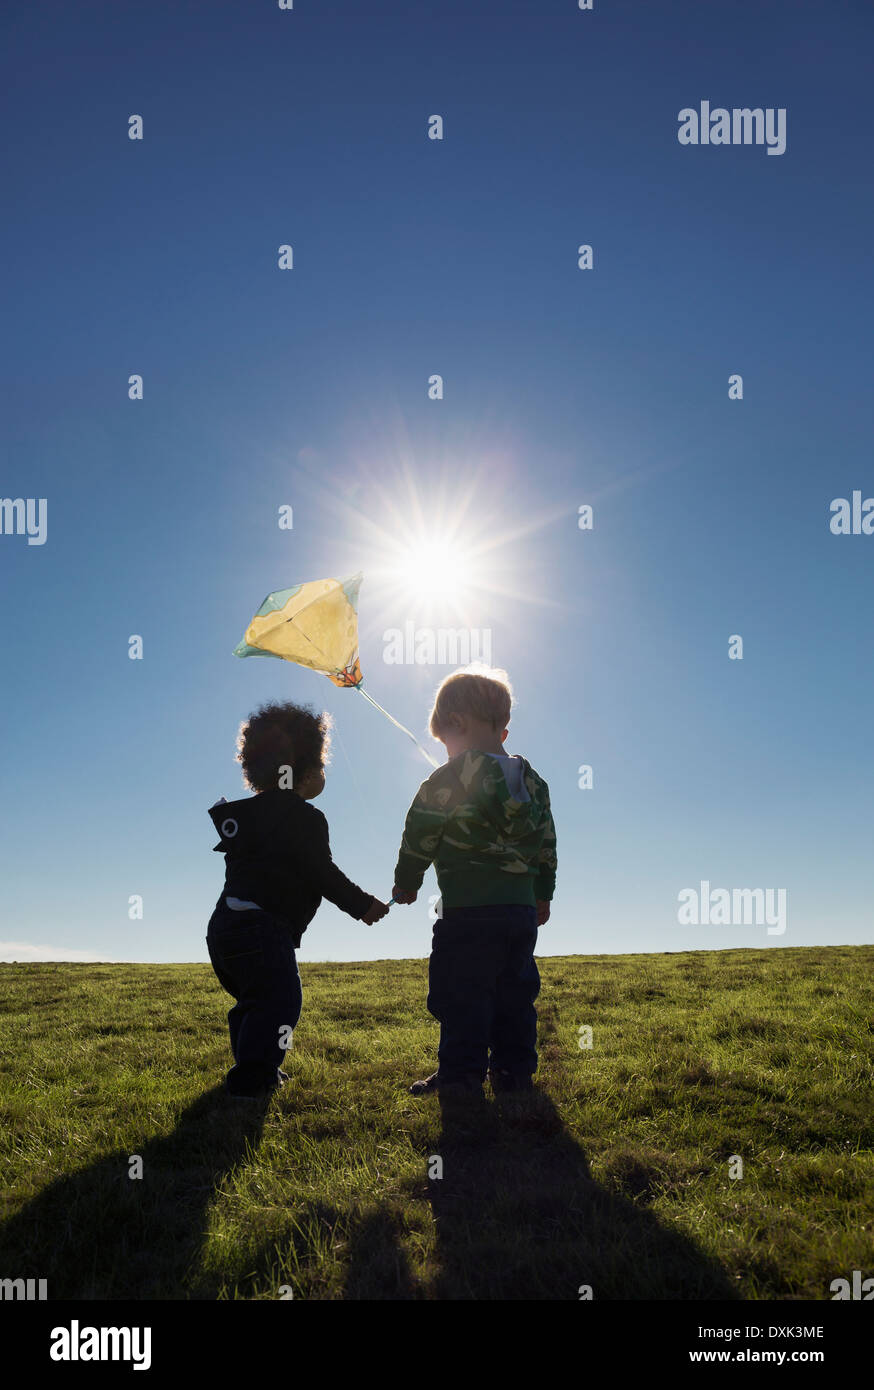 Boys watching kite flying against blue sky Stock Photo